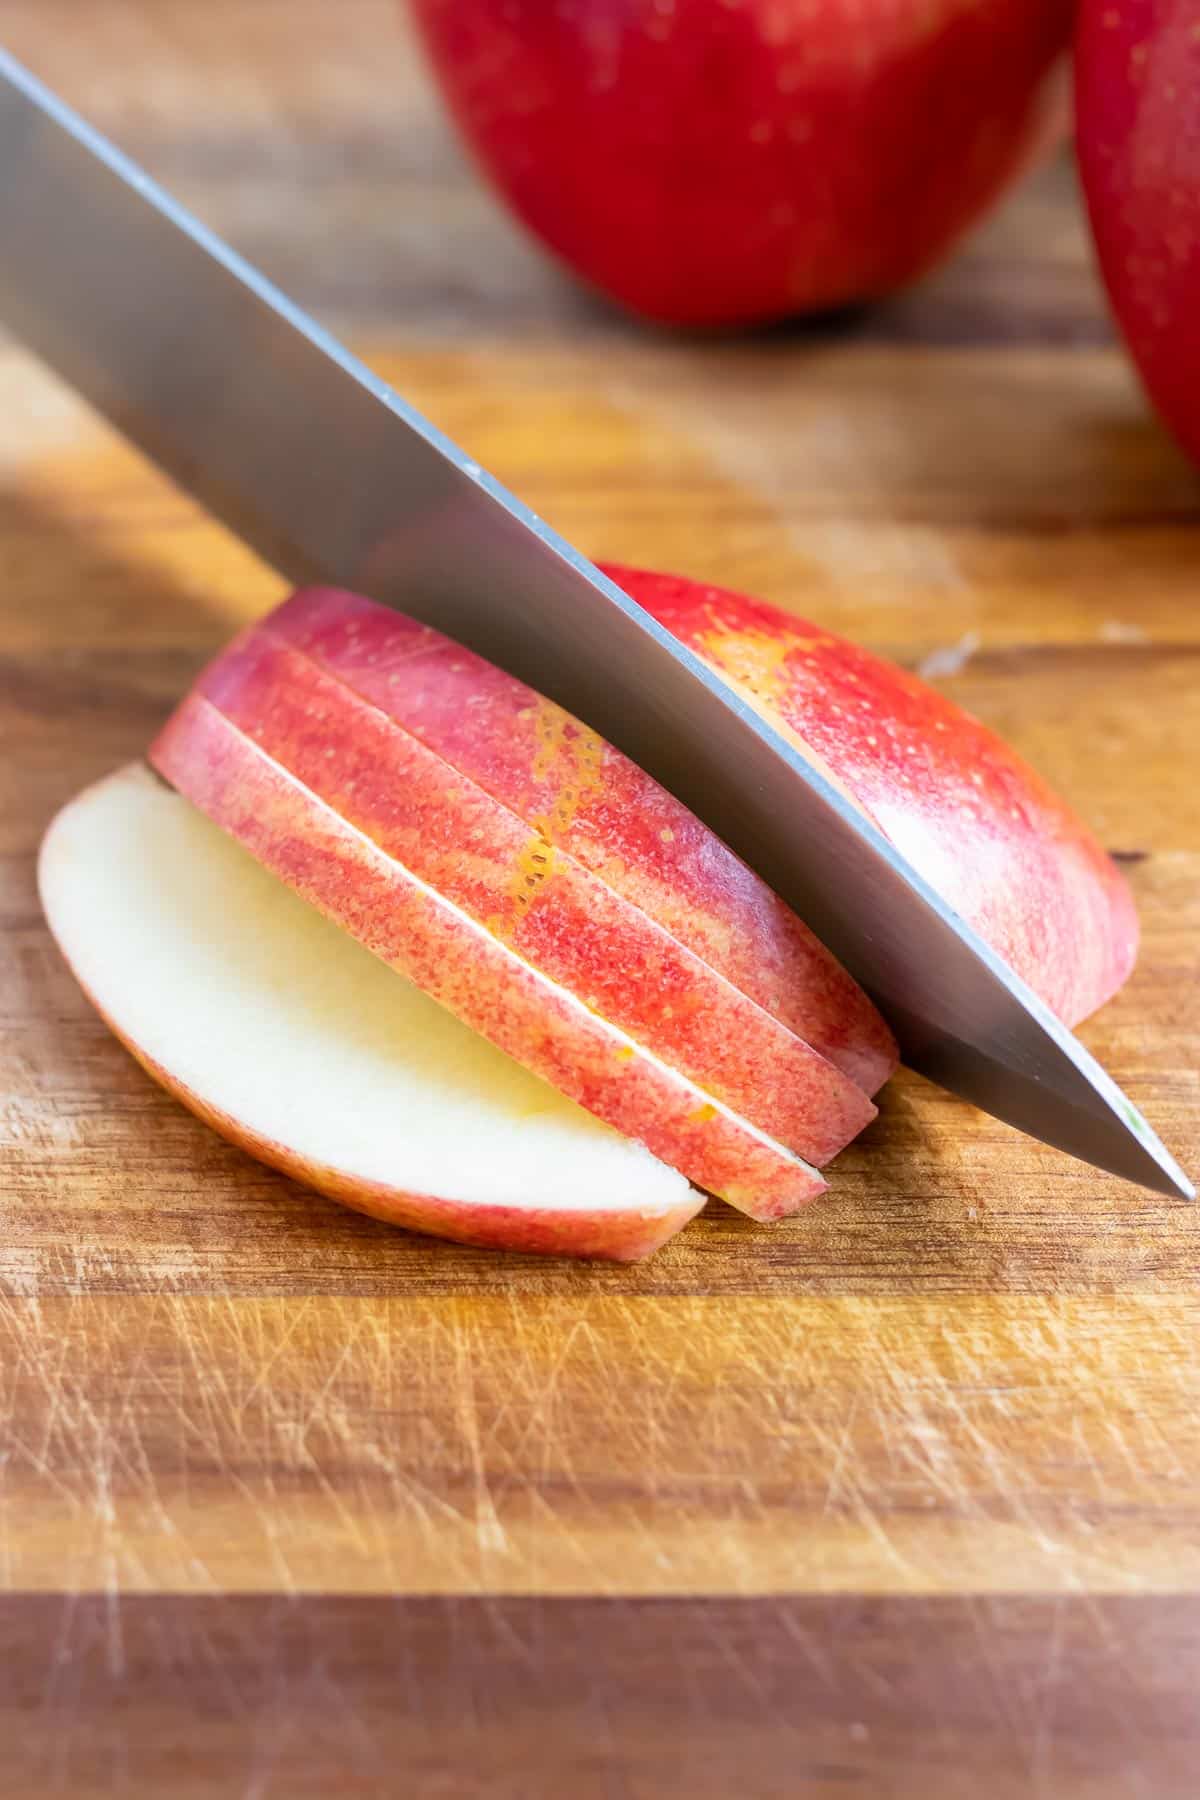 Lay the apple flat on the cutting board and then cut the apple into similar sized slices.